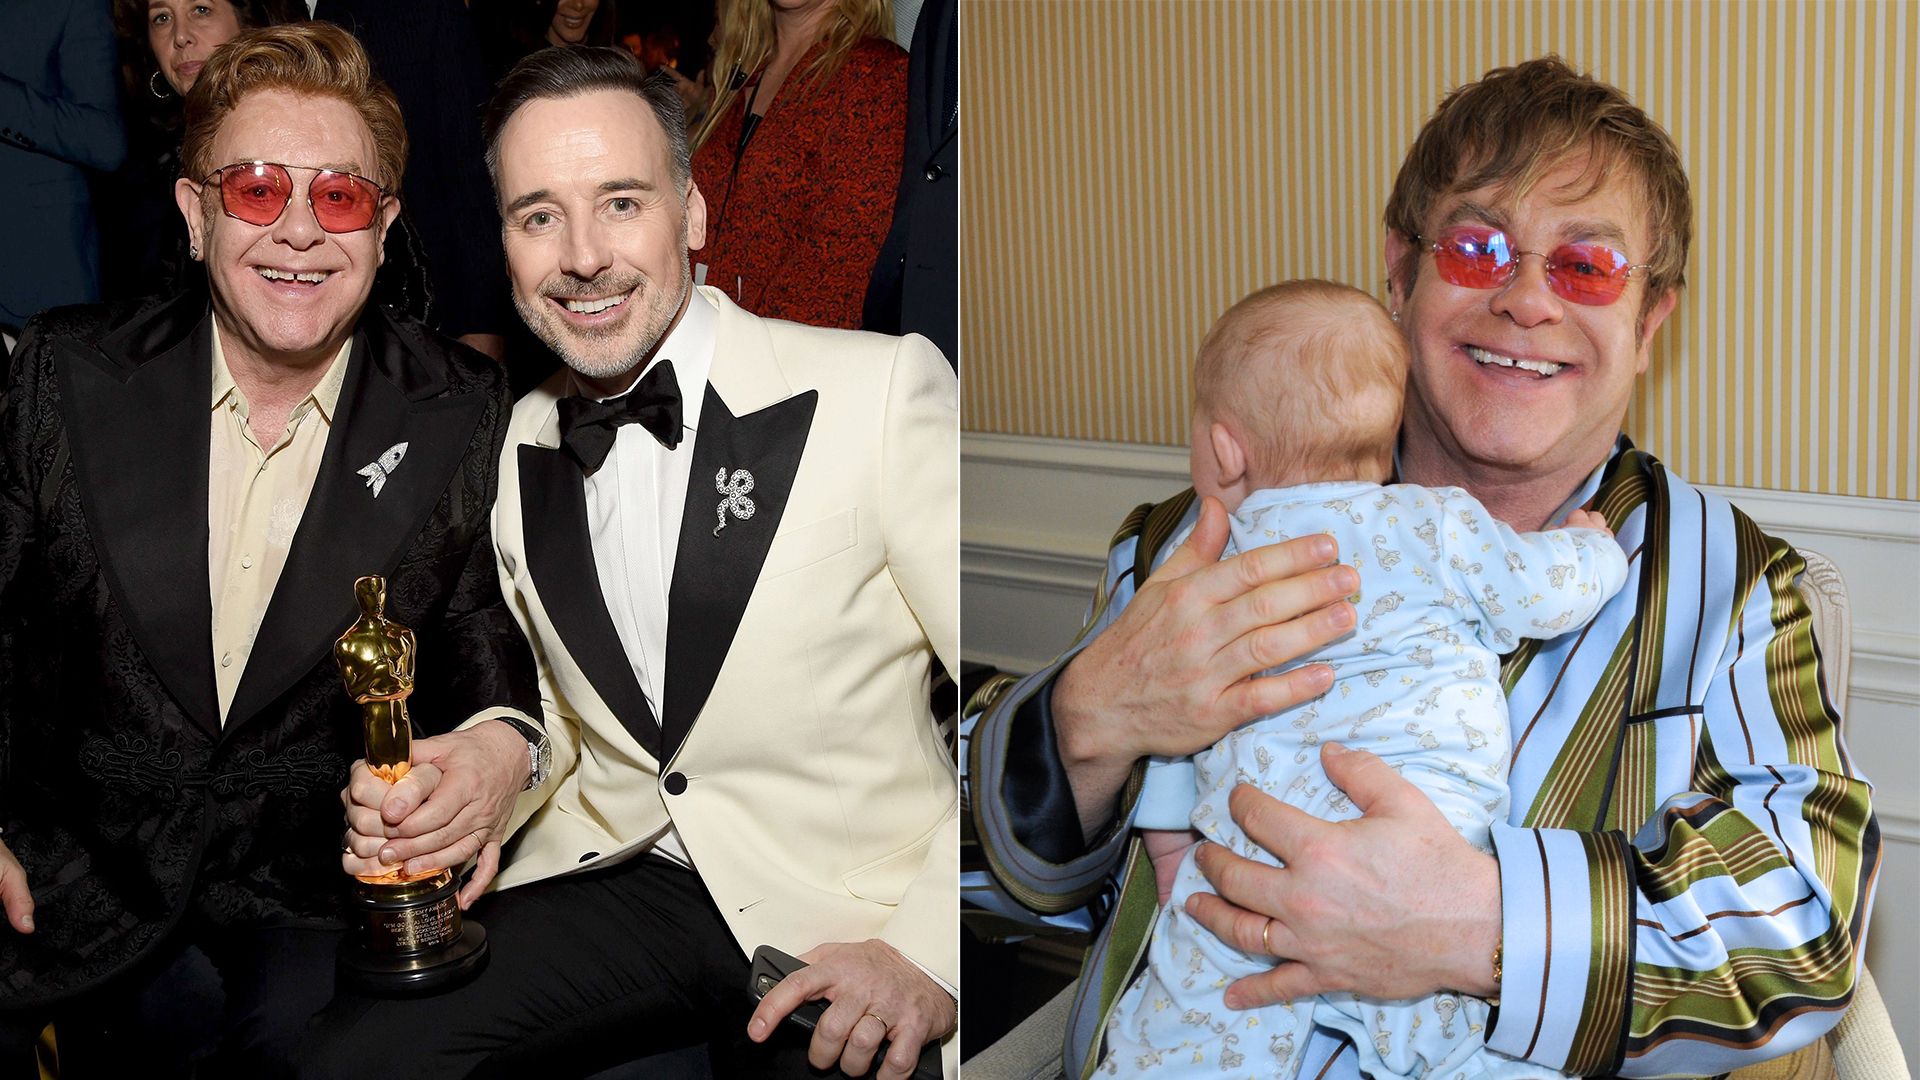 Rare glimpse inside Elton John and David Furnish's eclectic playroom for sons at £4.2m home